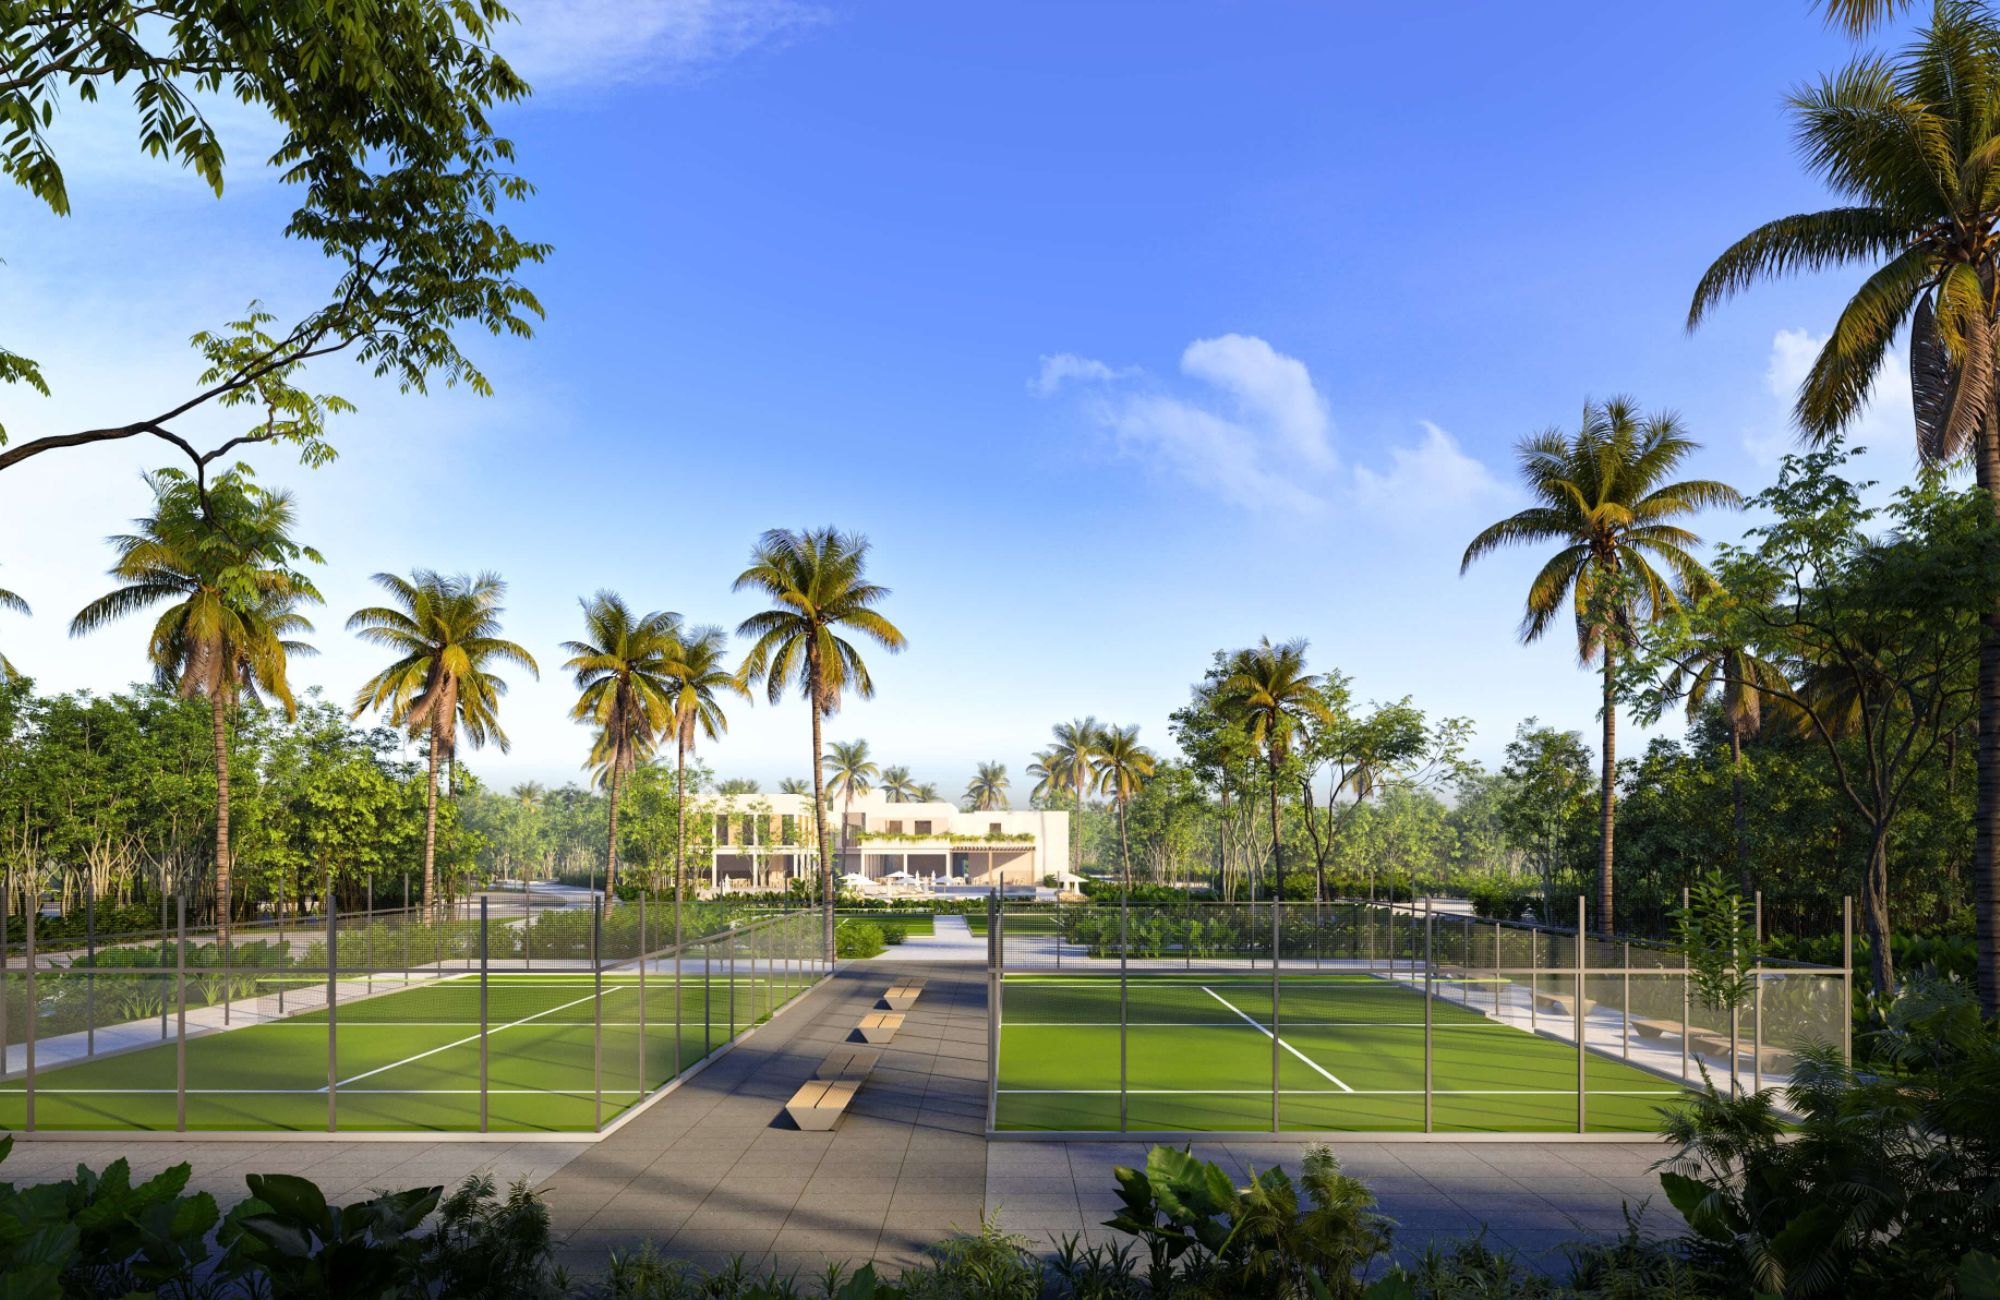 Residential lot in gated community Valenia, 250 meters from the clubhouse, with amenities, already deeded for sale in Playa del Carmen.